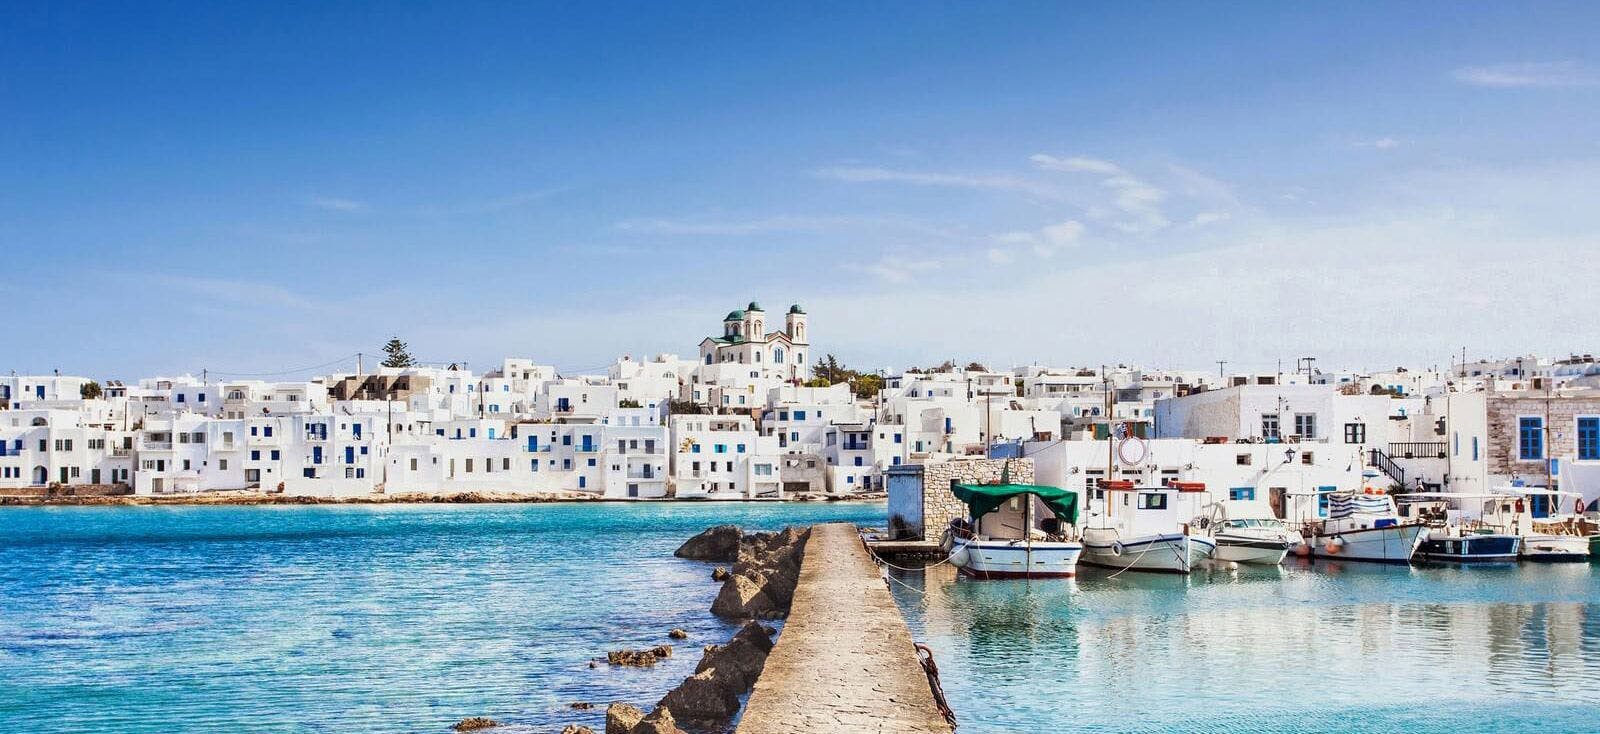 White sugar cube buildings along the seafront in Paros